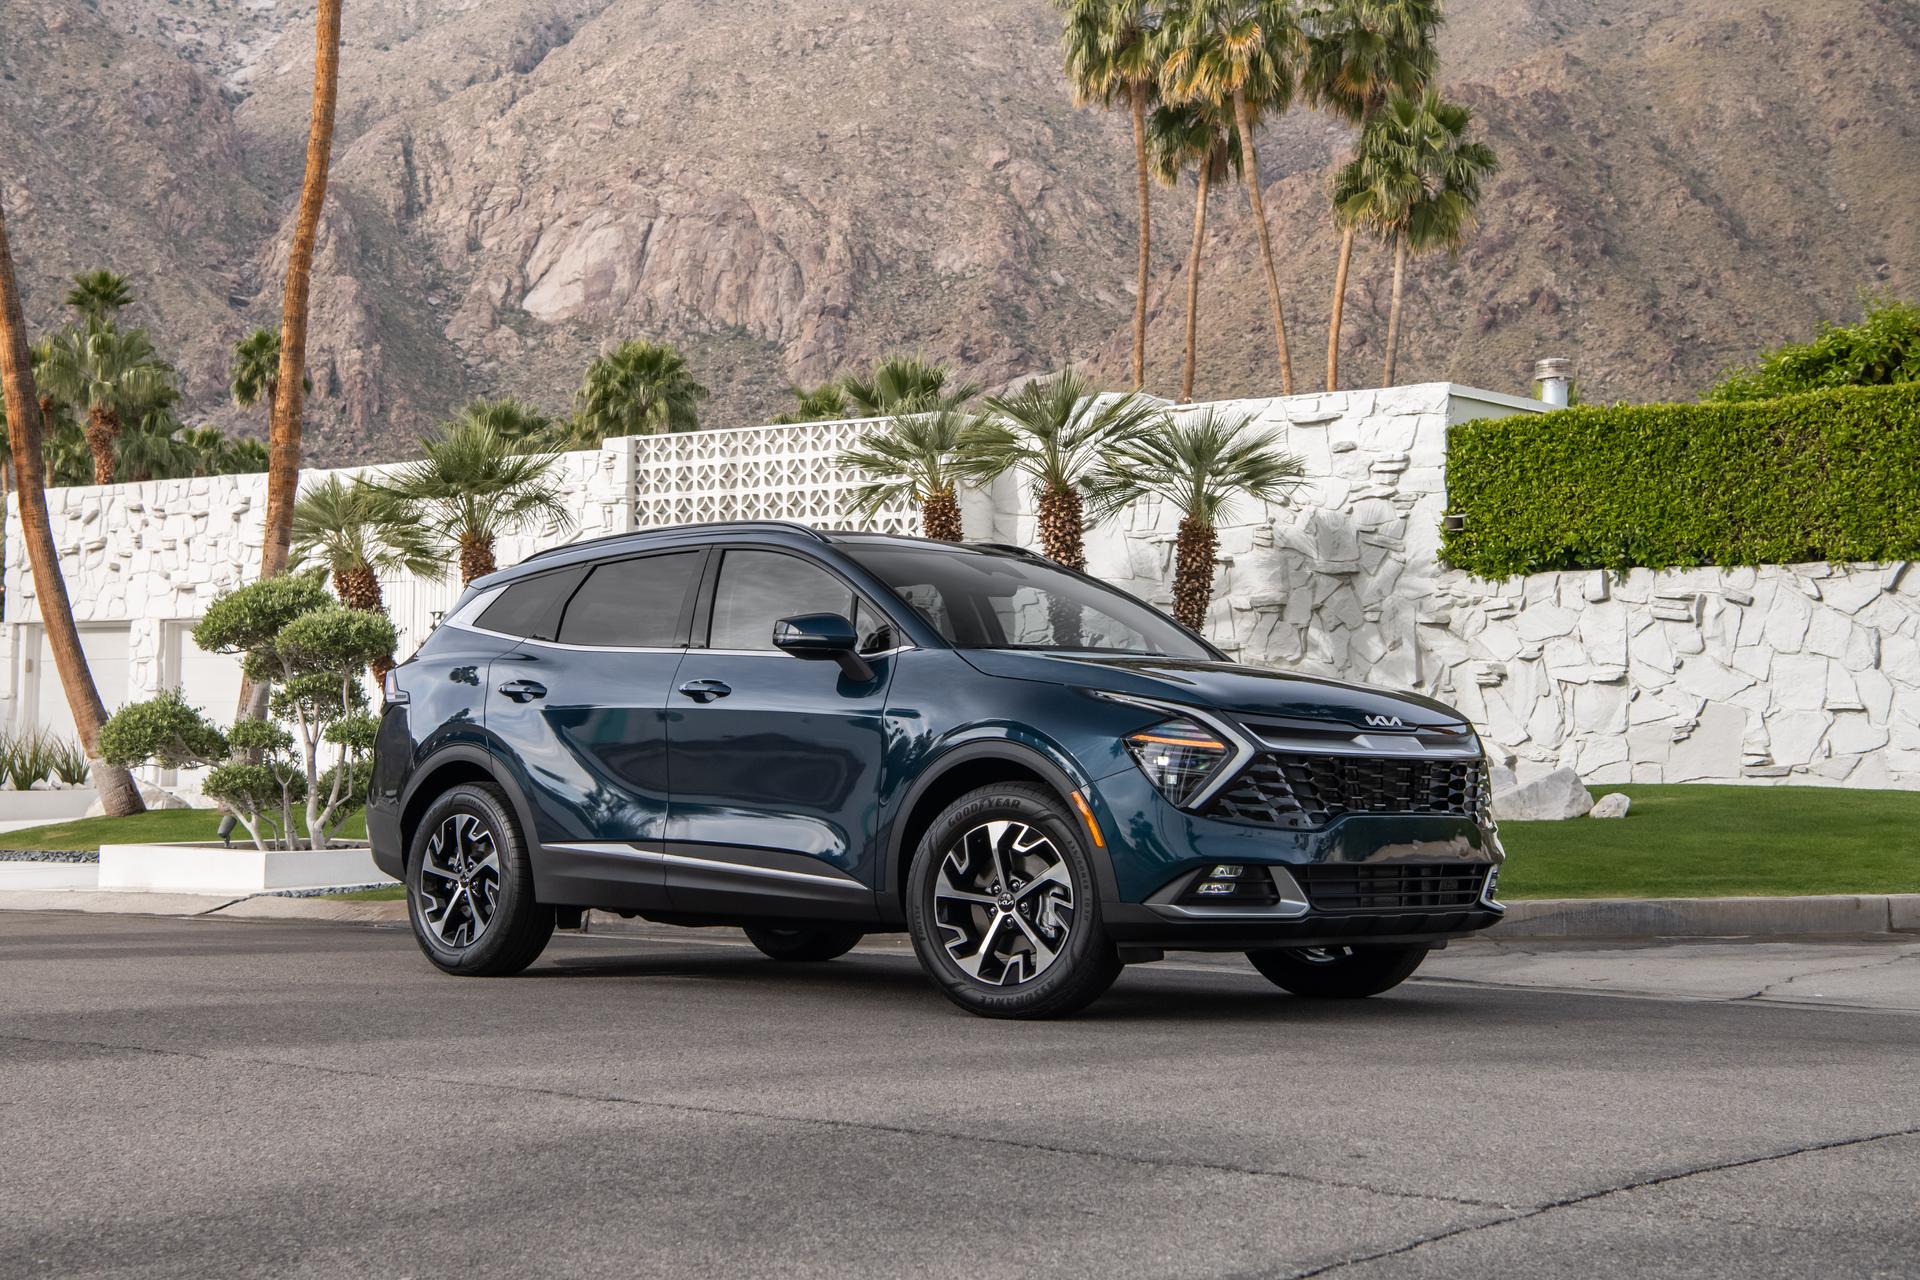 Review: 2023 Kia Sportage Hybrid grows up and offers all-new efficiency